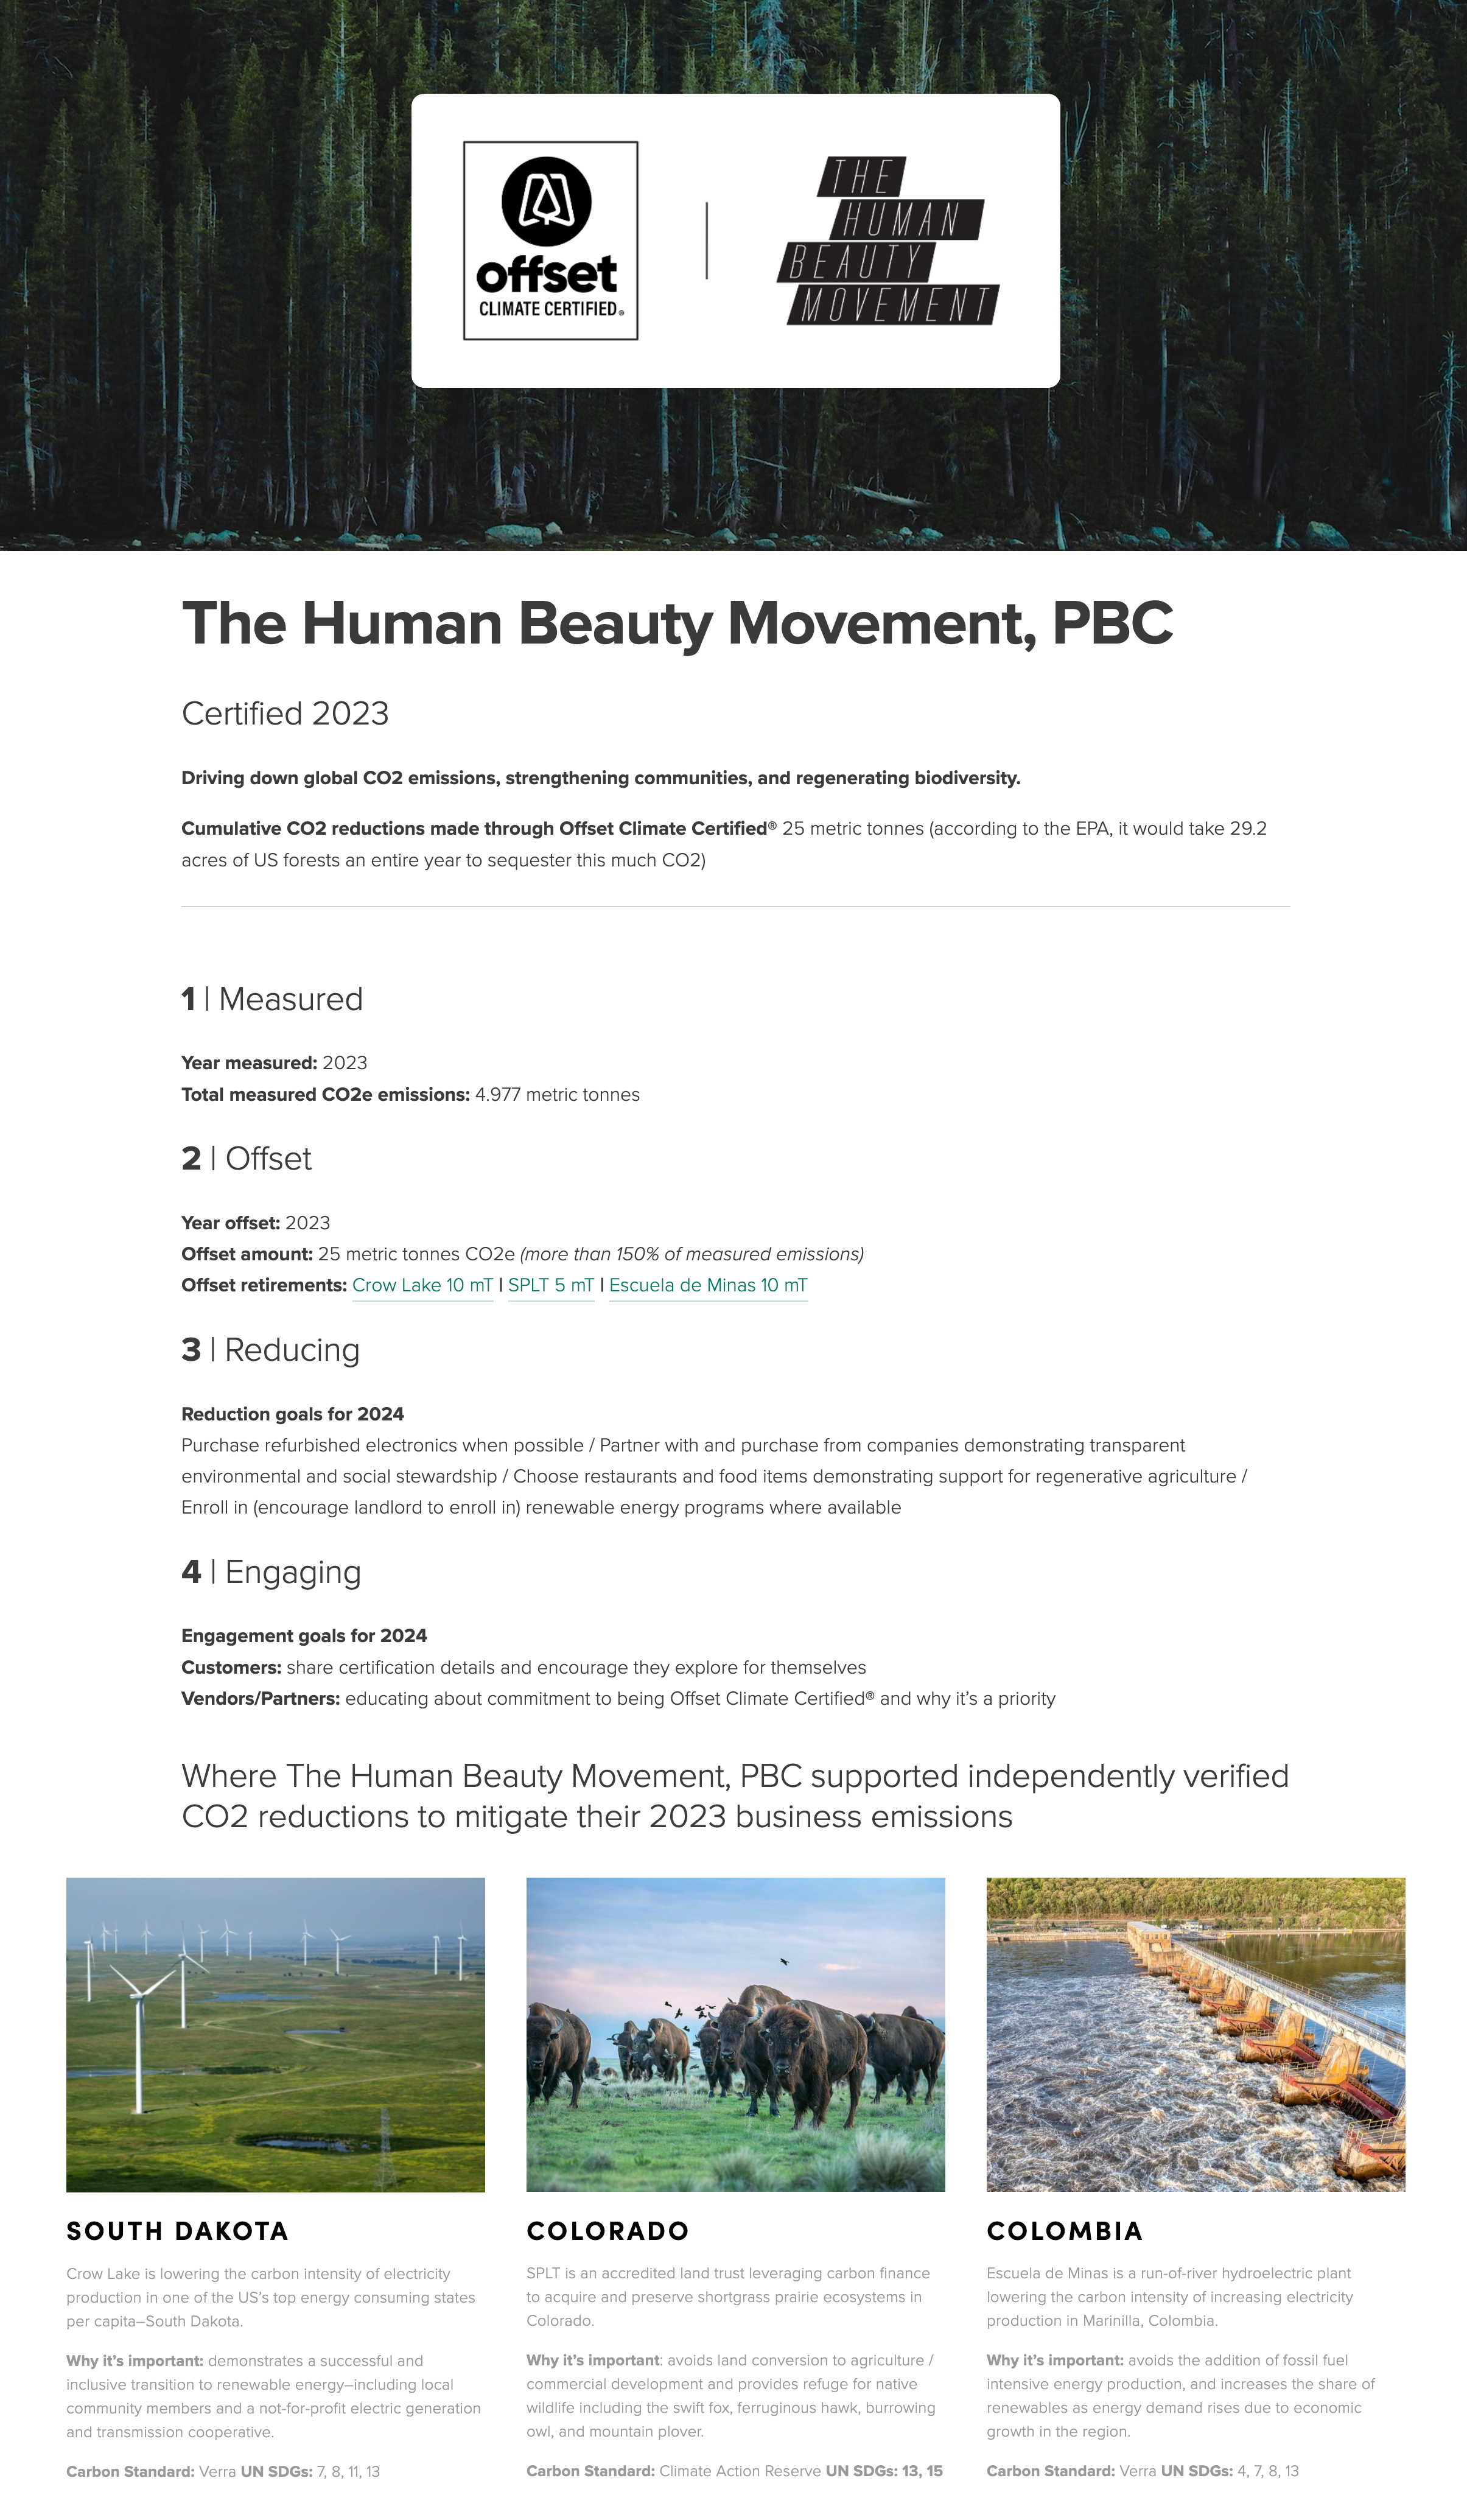 The Human Beauty Movement Offset Alliance Climate Neutral Certification